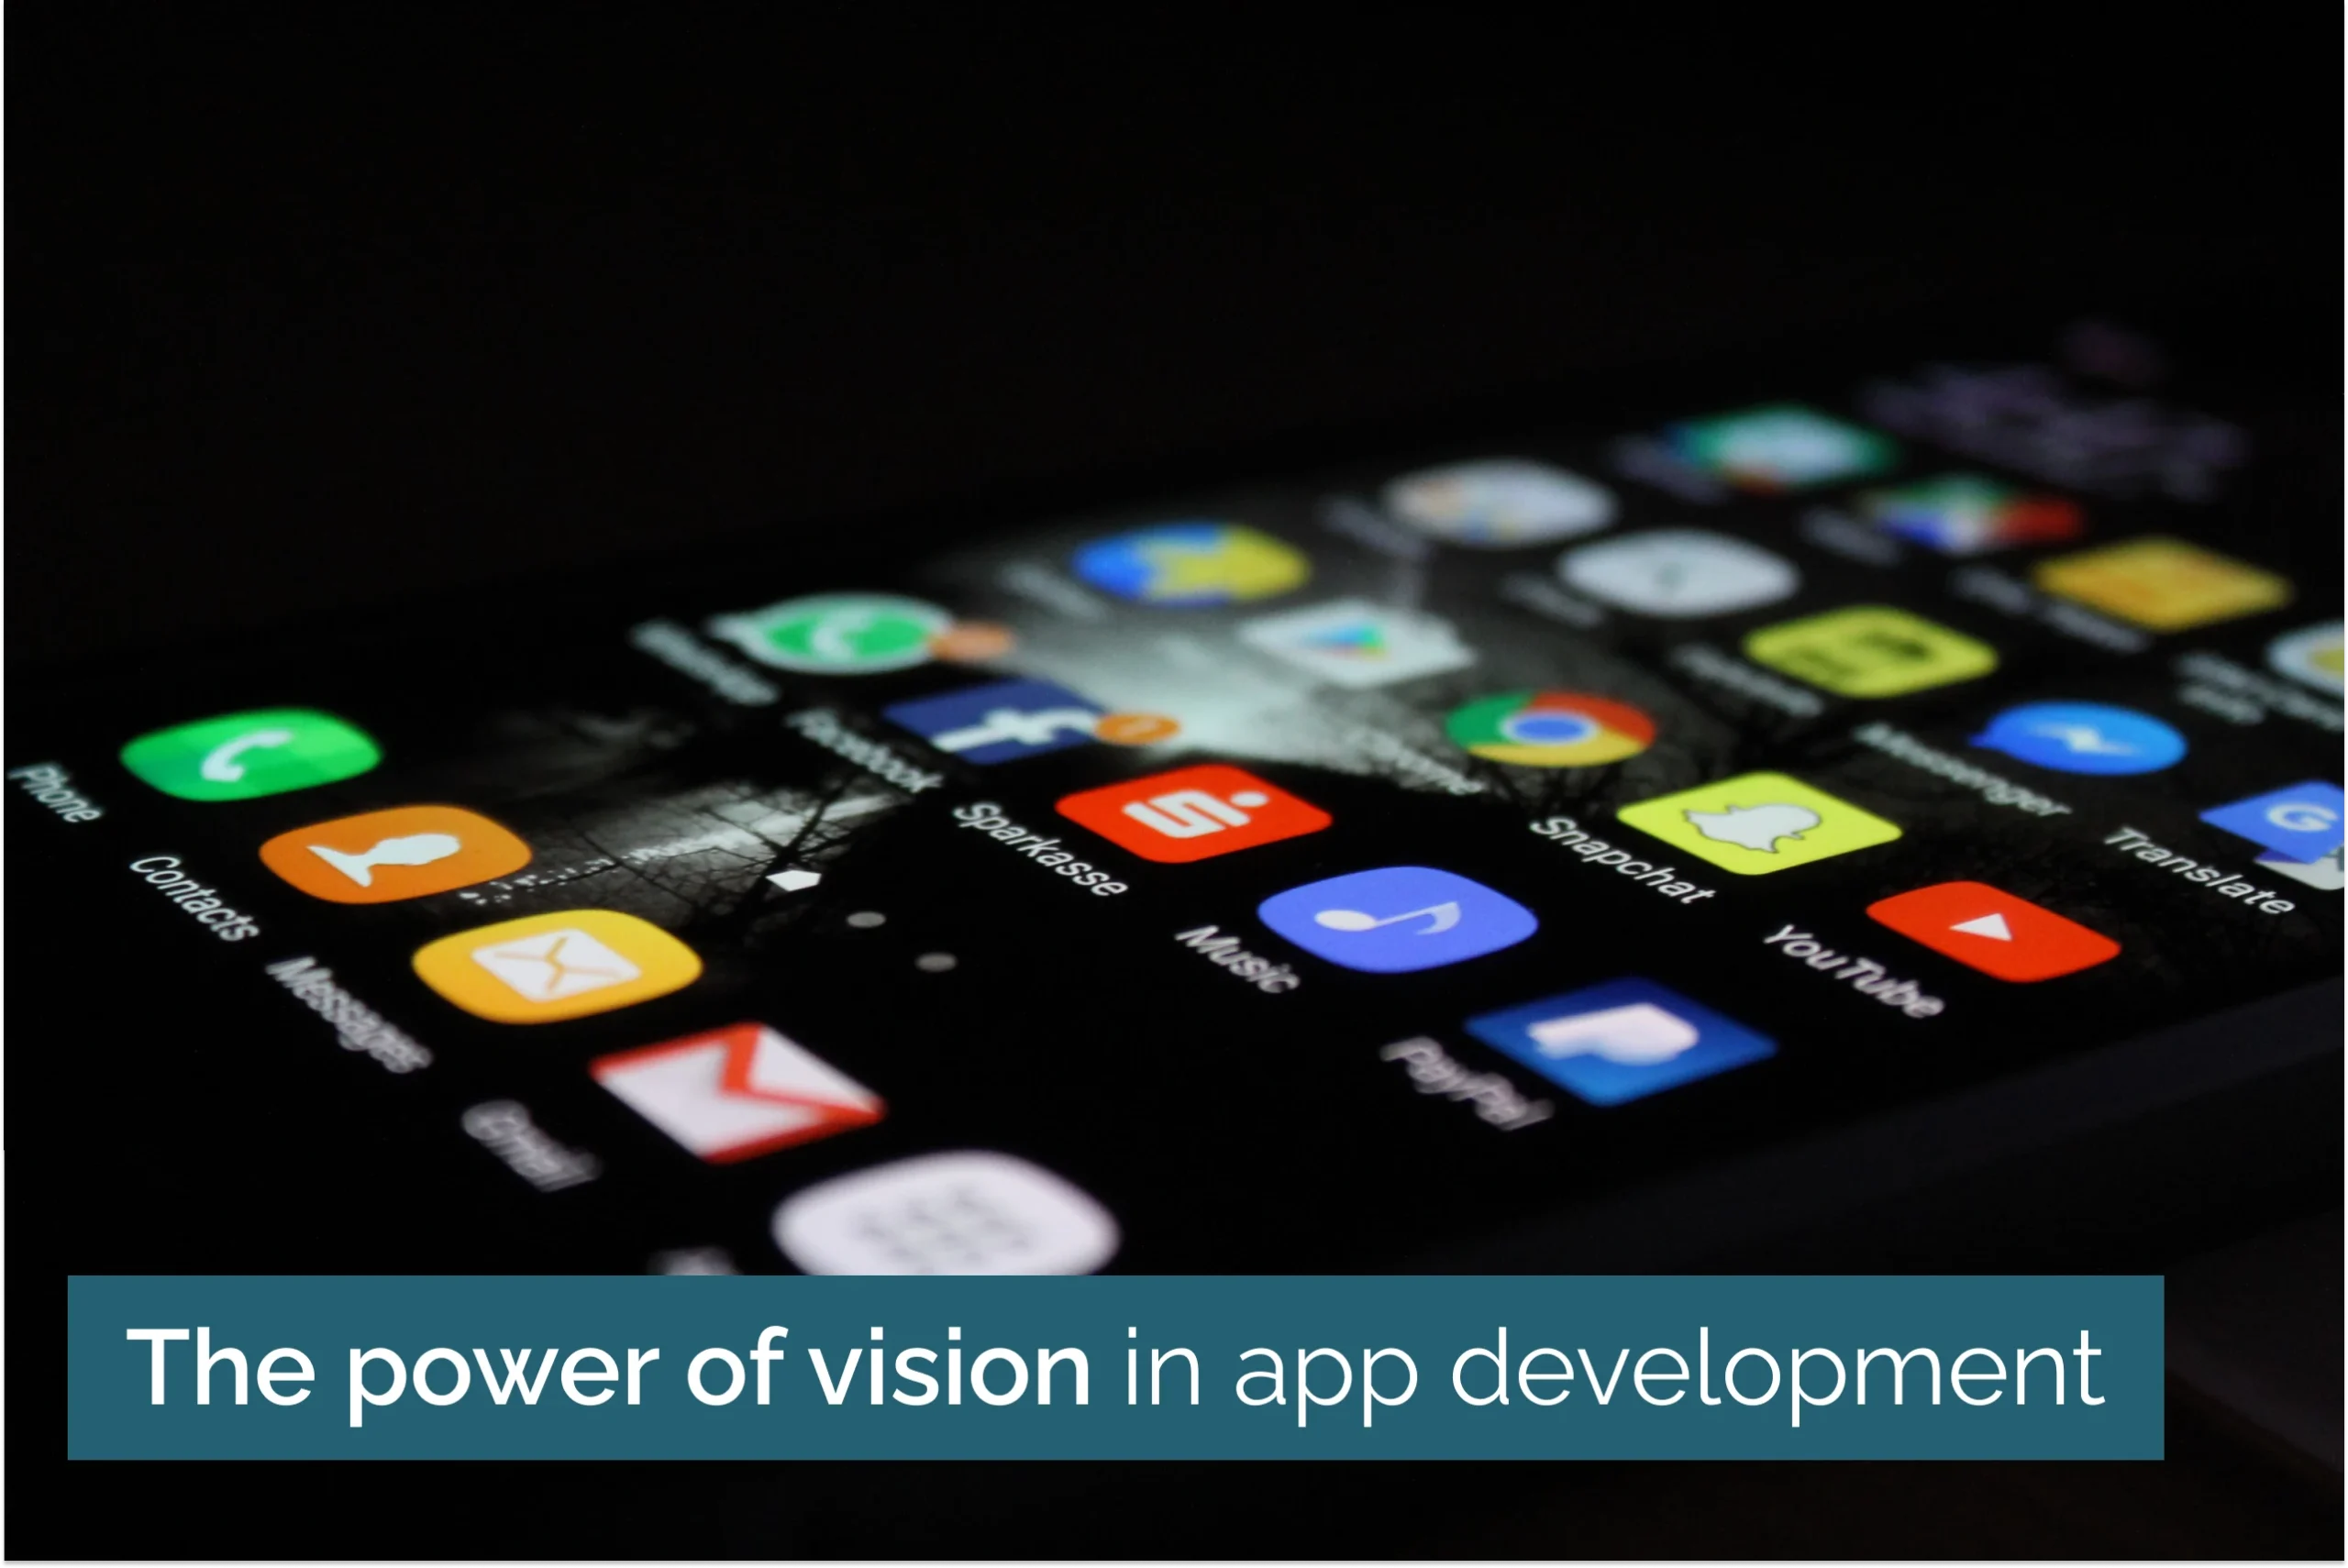 The power of vision in app development